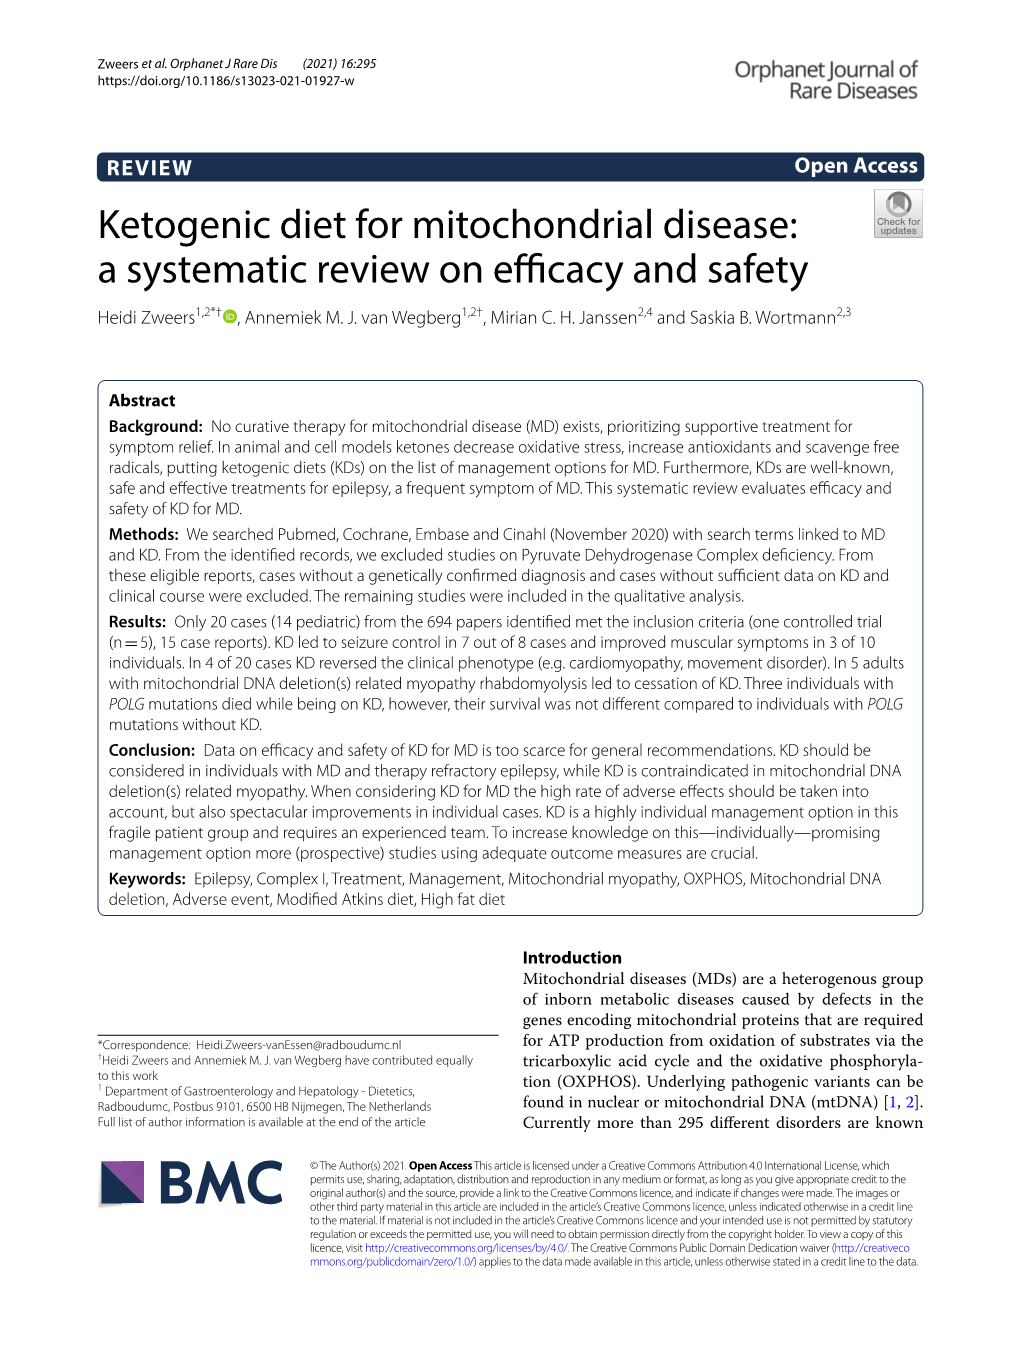 Ketogenic Diet for Mitochondrial Disease: a Systematic Review on Efcacy and Safety Heidi Zweers1,2*† , Annemiek M